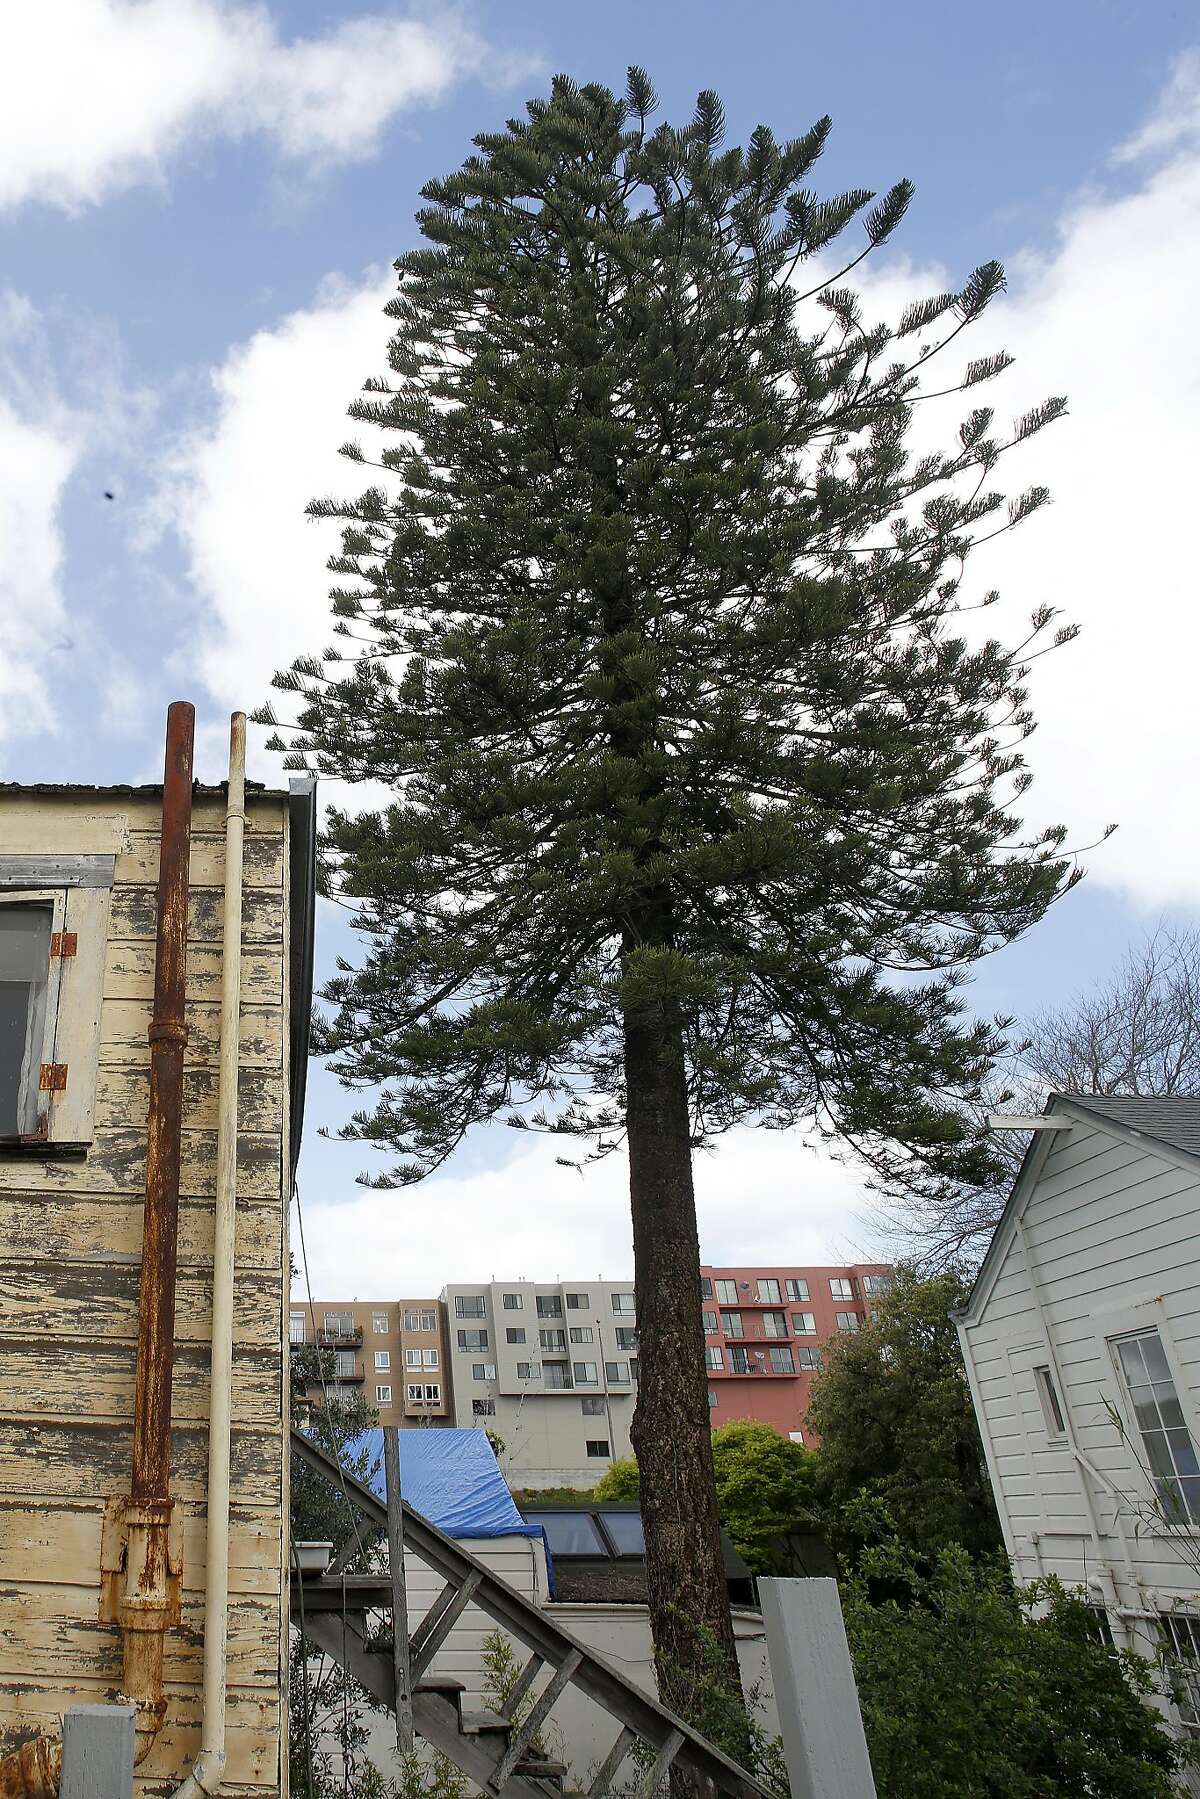 The cook pine tree at 46 Cook St. seen in the neighborhood in San Francisco, California, on tuesday, march 22, 2016.